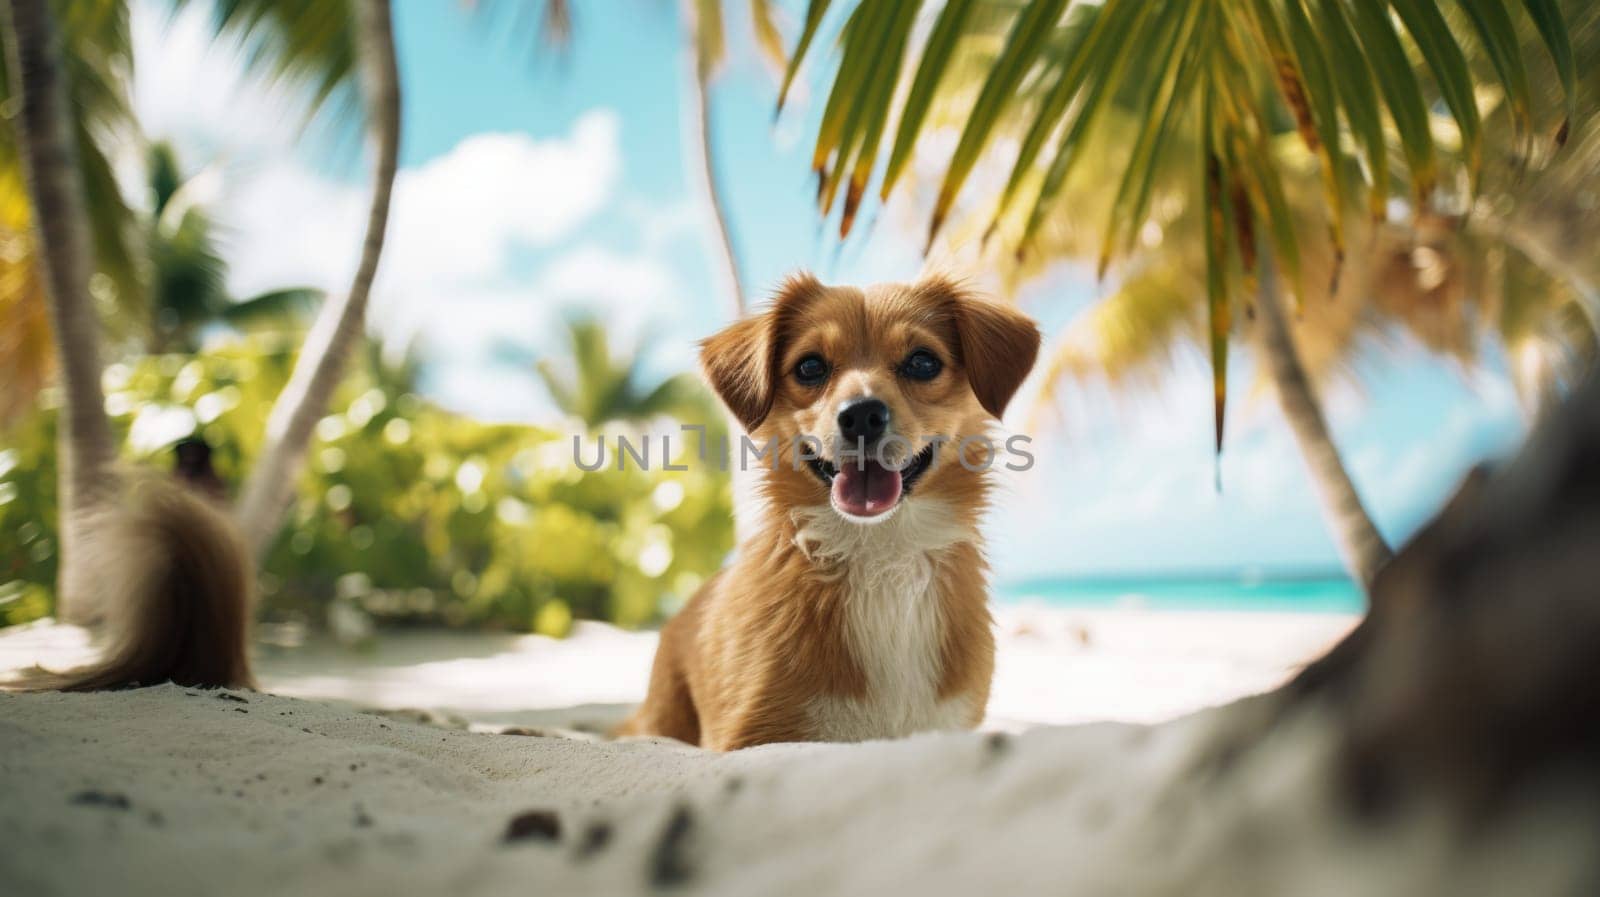 A dog sitting on the beach with palm trees in the background